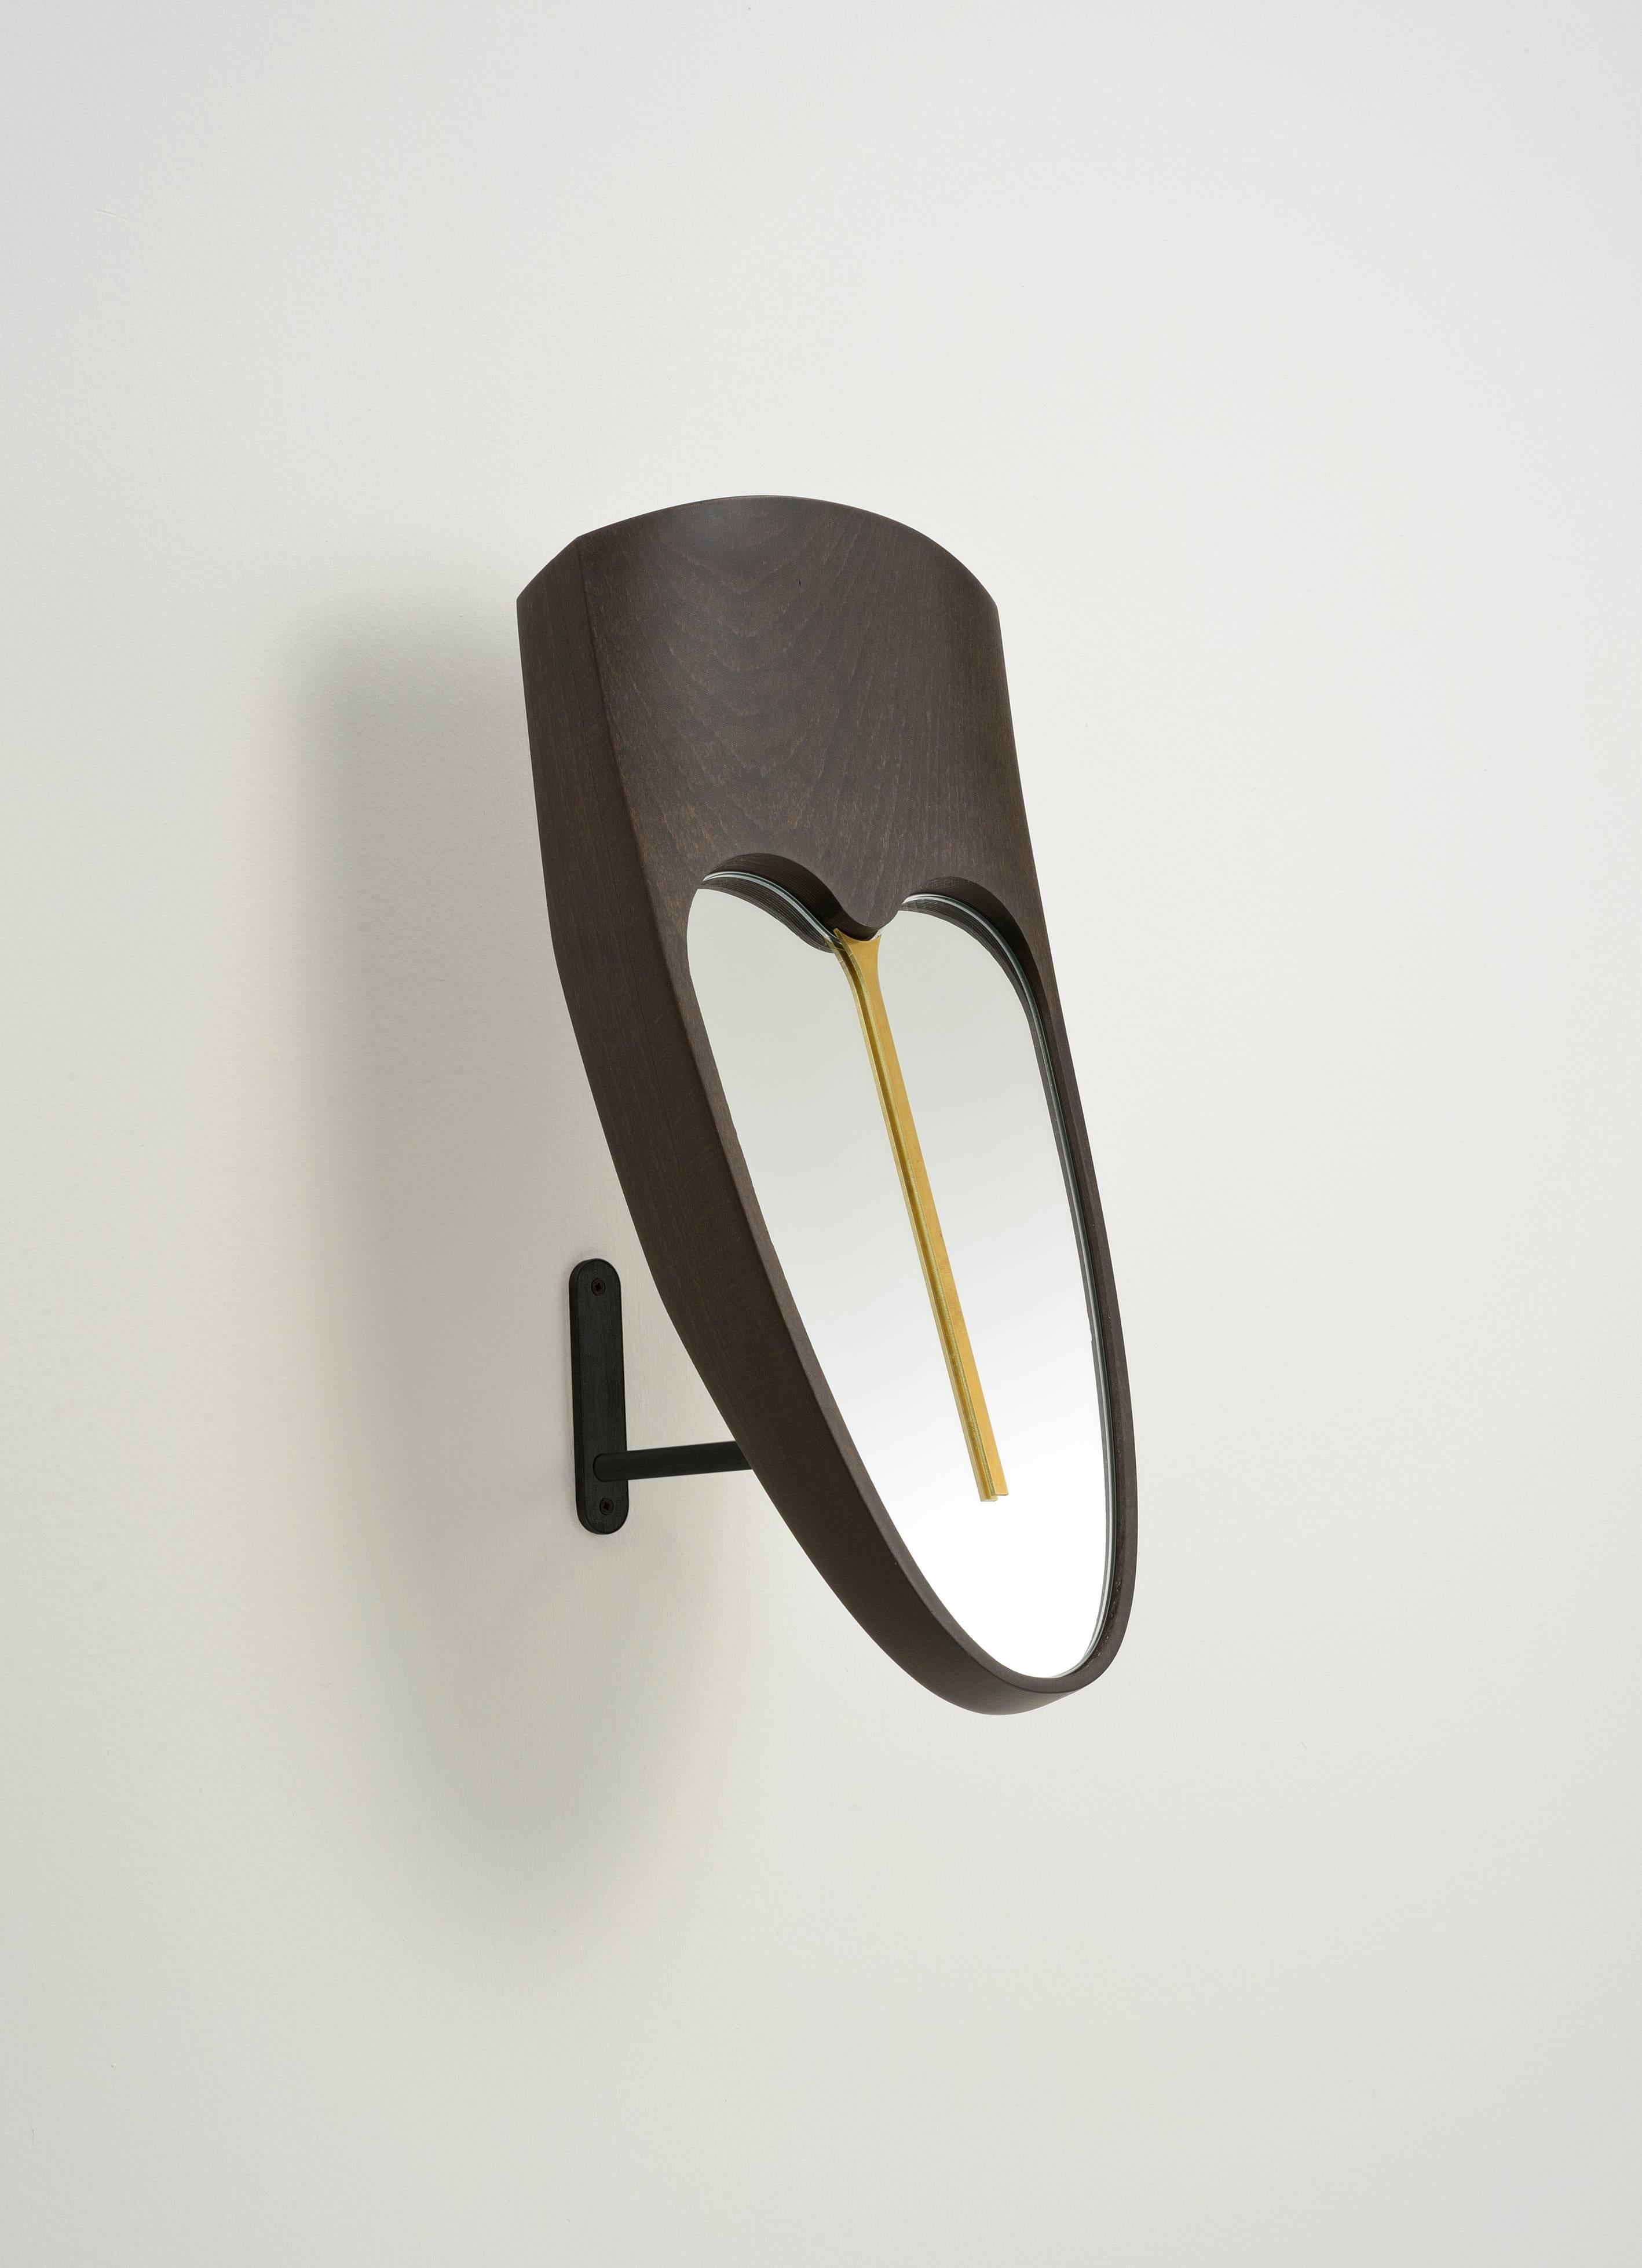 A functional mirror for a dressing room, or wooden masks and sculpture for your living or your entrance. The forehead mask Eze, is made of solid beech wood Wengè finishing, with a brass element on the mirror. The base is an iron stand black